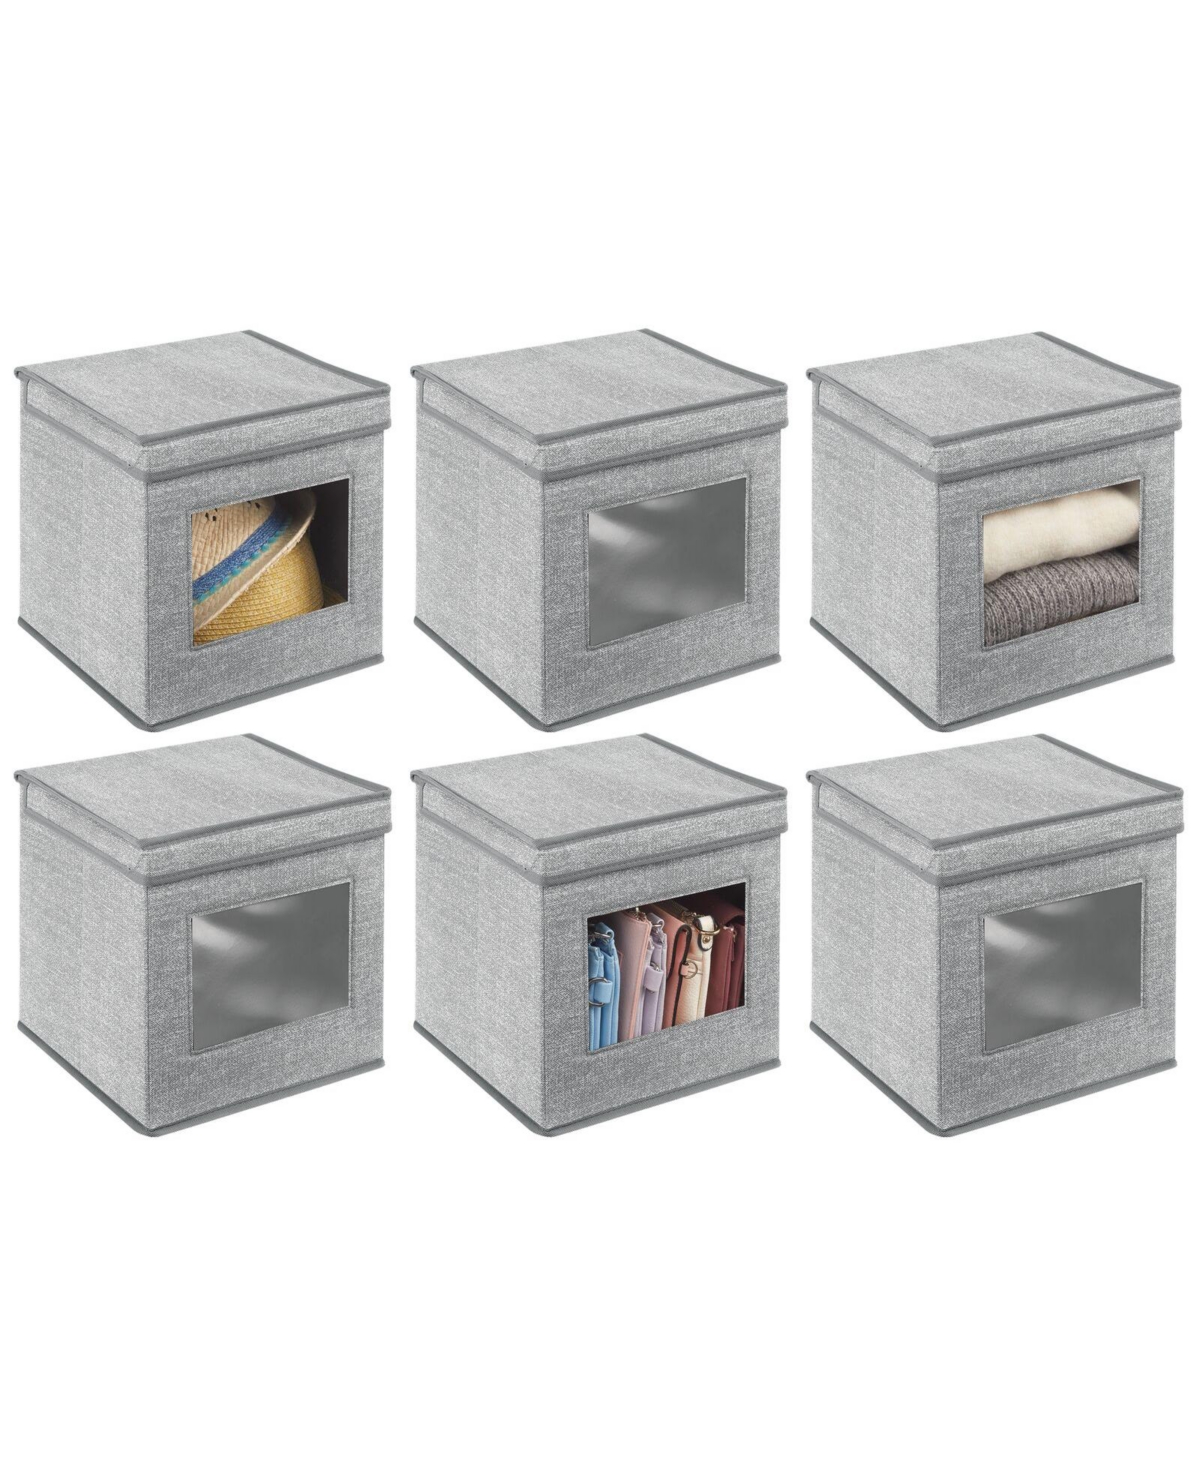 Fabric Stackable Cube Storage Organizer Box, 6 Pack - Gray